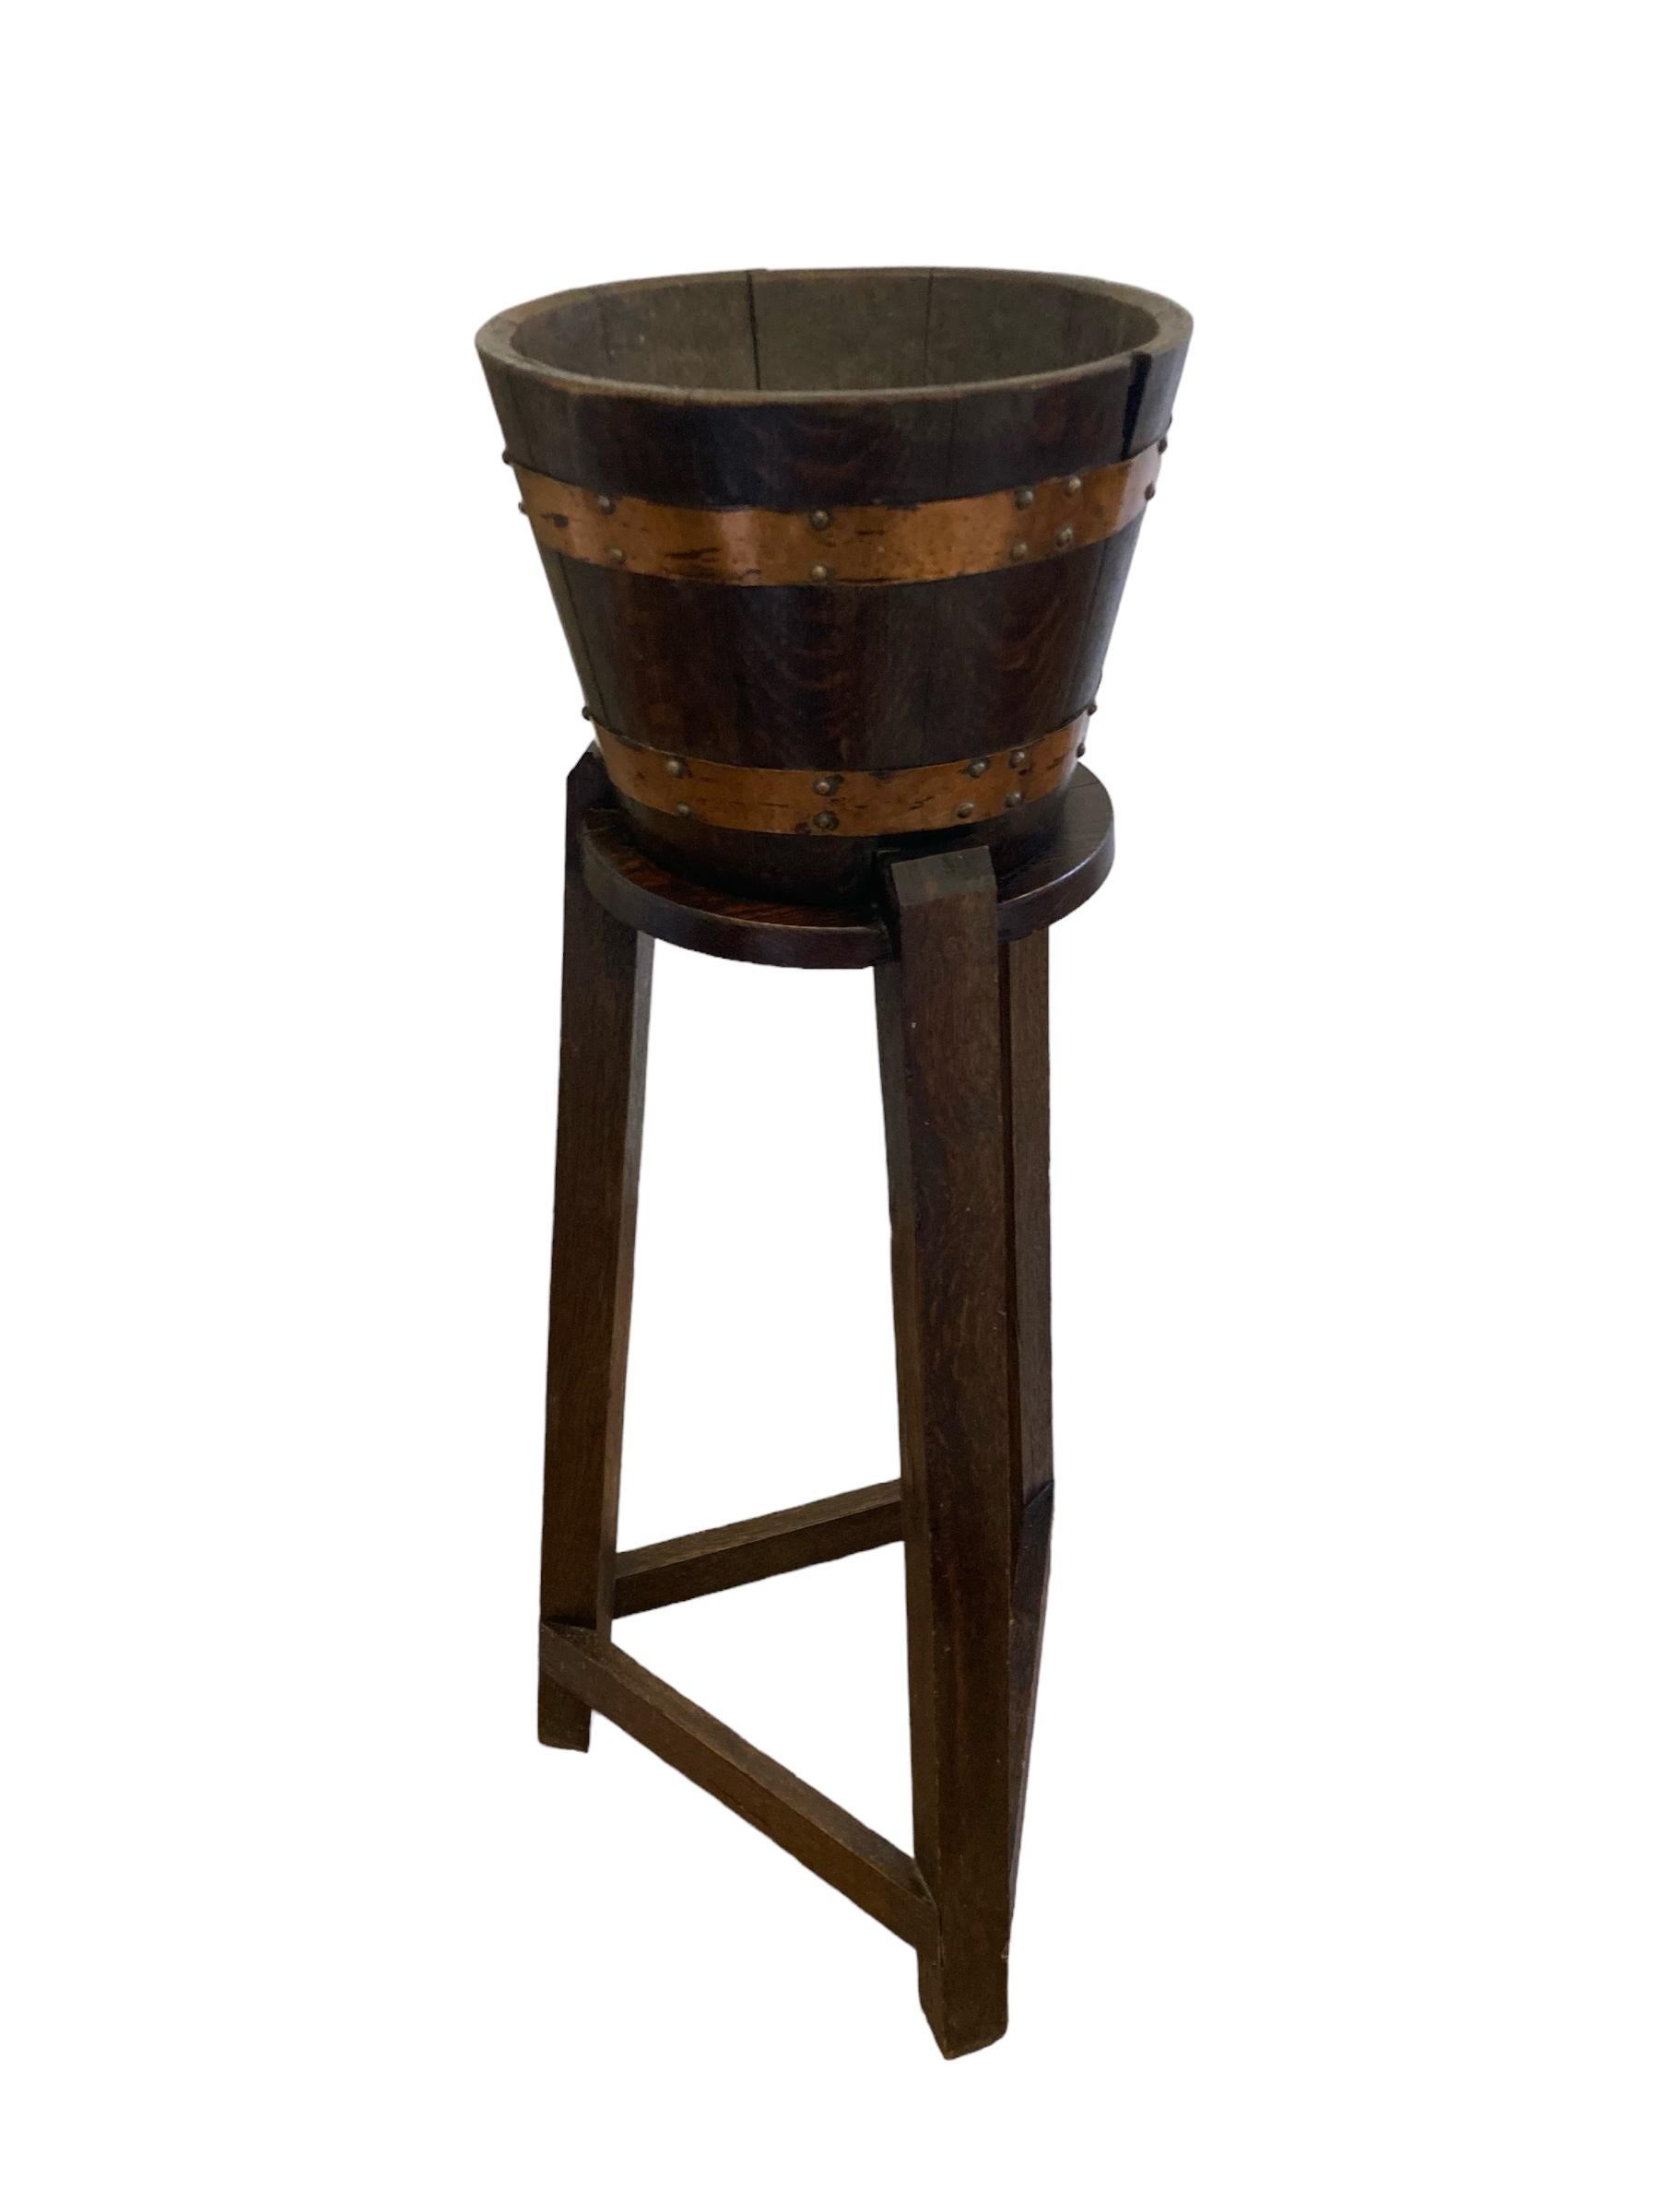 An exquisite brass bound oak jardinieres / plant stand made in a barrel construction standing on square legs. Made around the turn of the 20th century in an arts and Crafts style, these tubs were often constructed using the timber from old ships. A